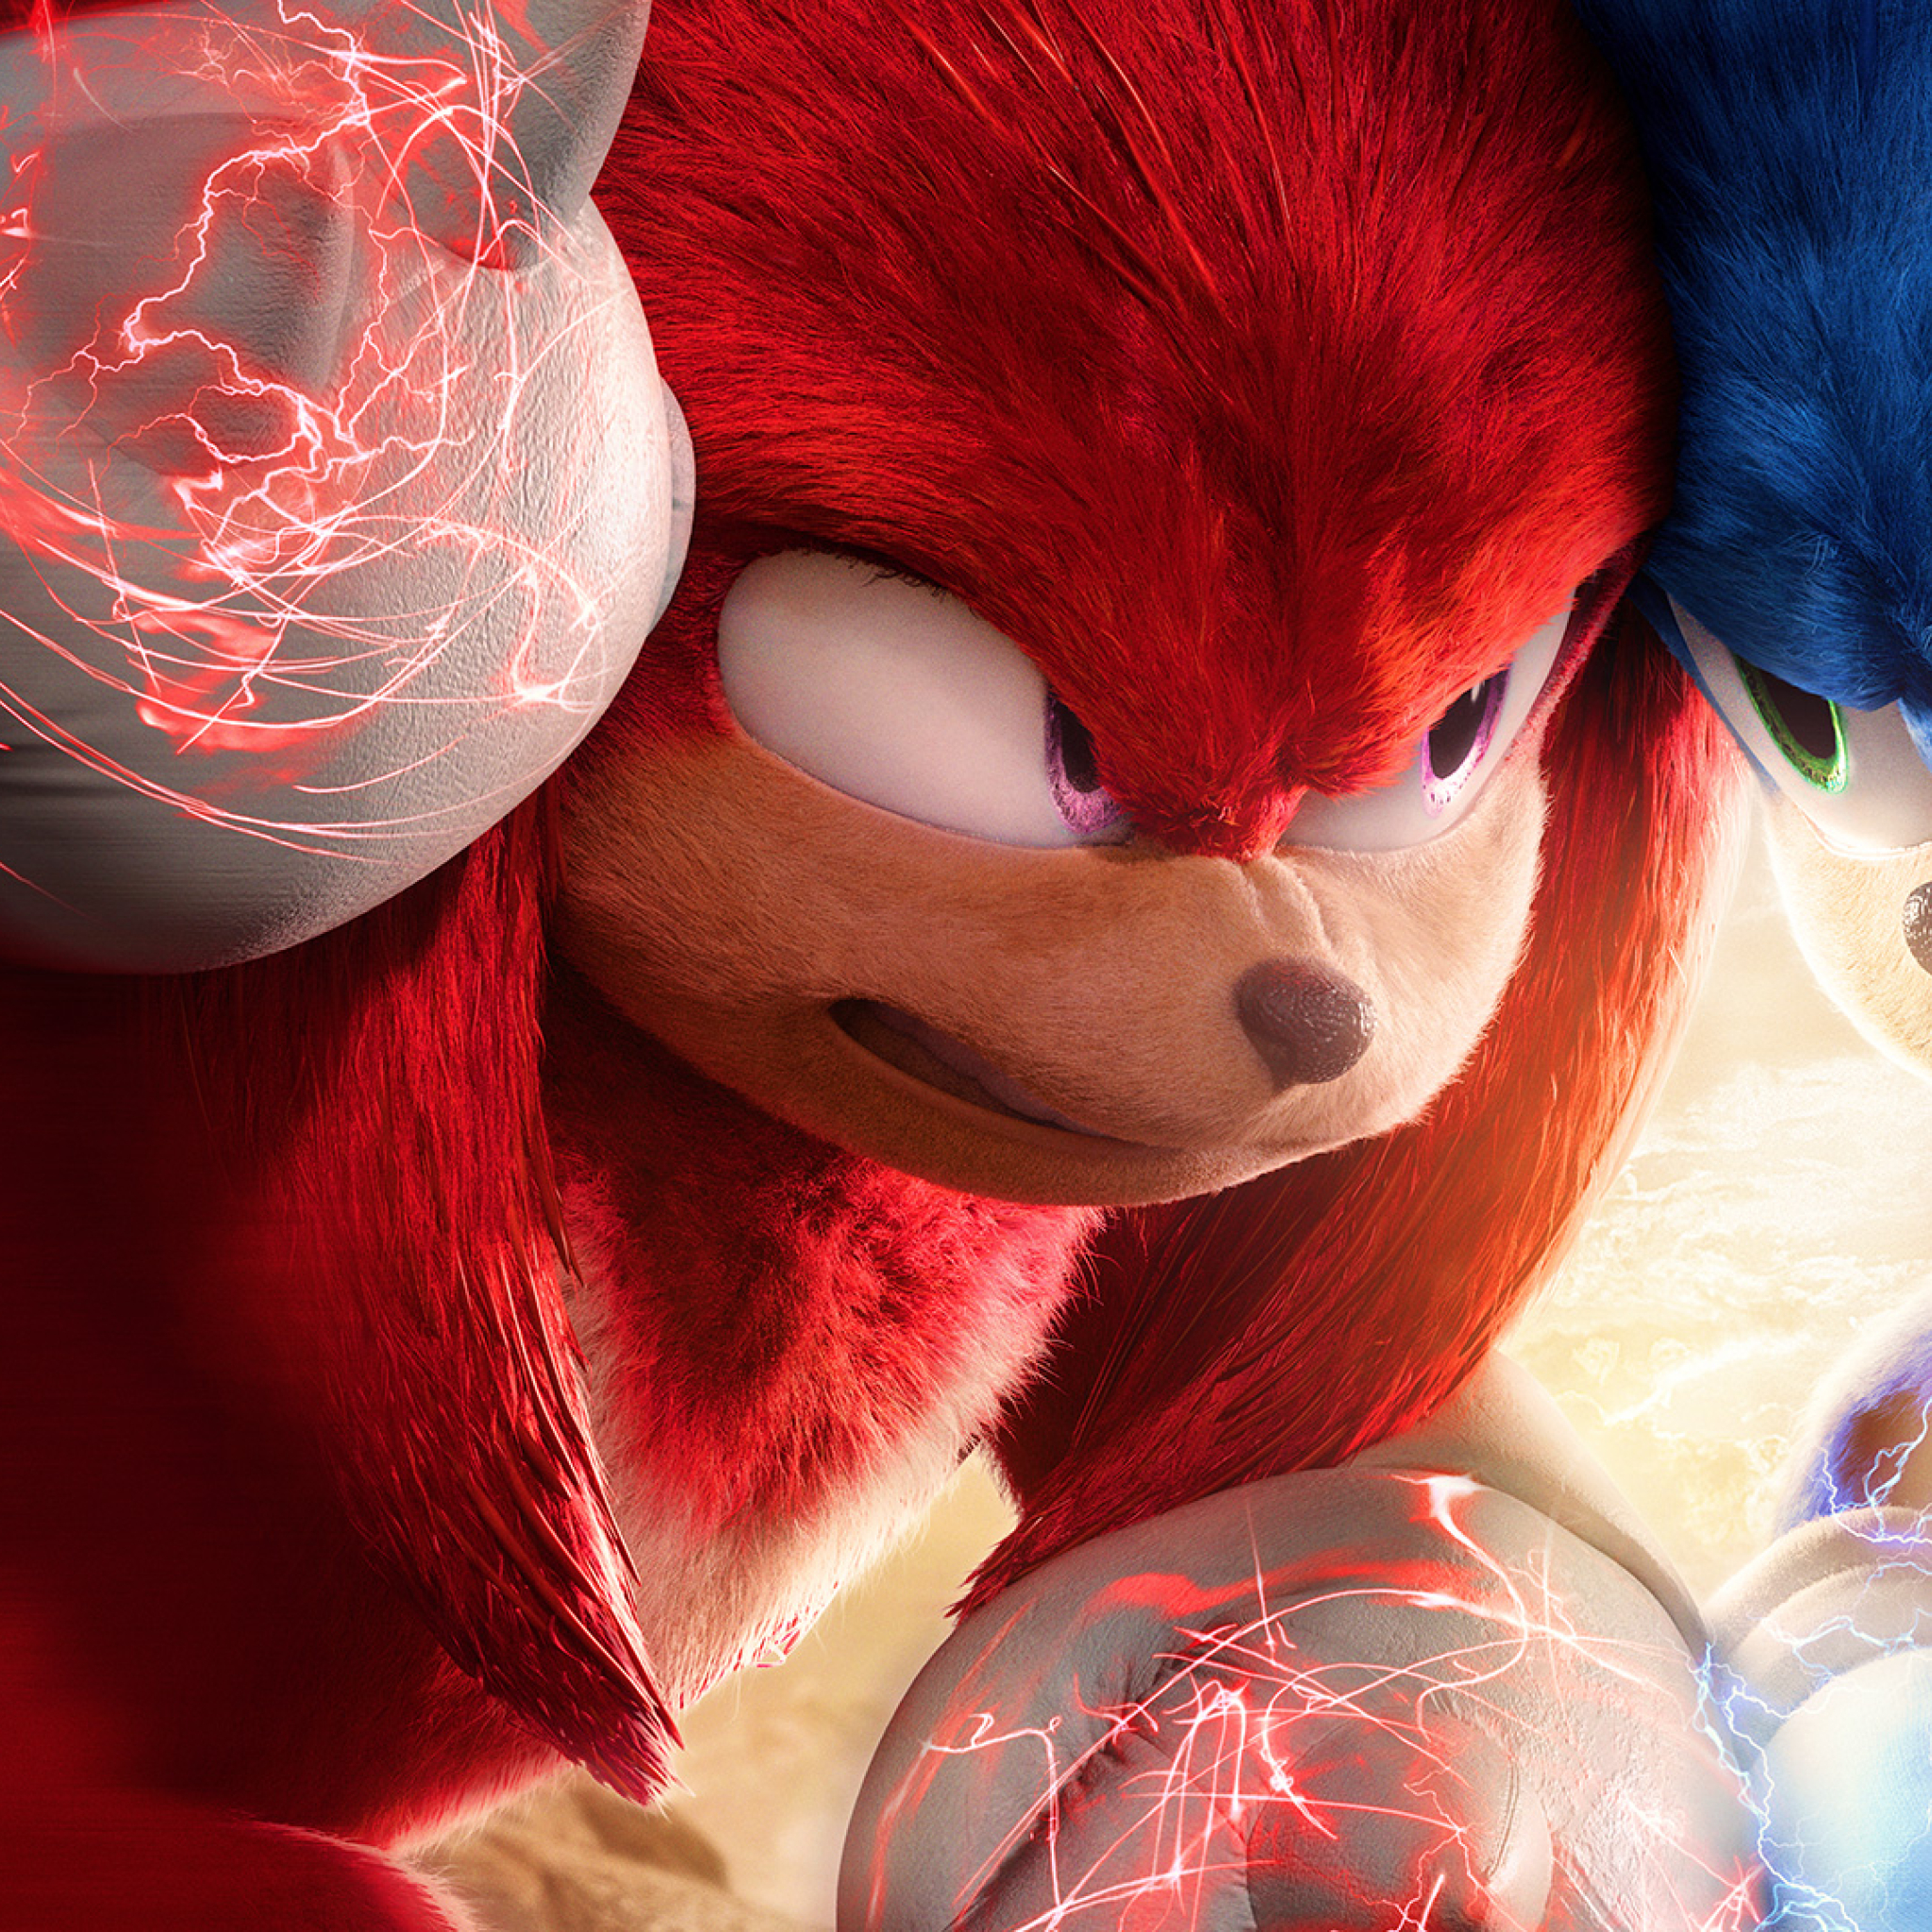 Sonic the Hedgehog Knuckles the Echidna HD Sonic the Hedgehog 2 Wallpapers   HD Wallpapers  ID 107482